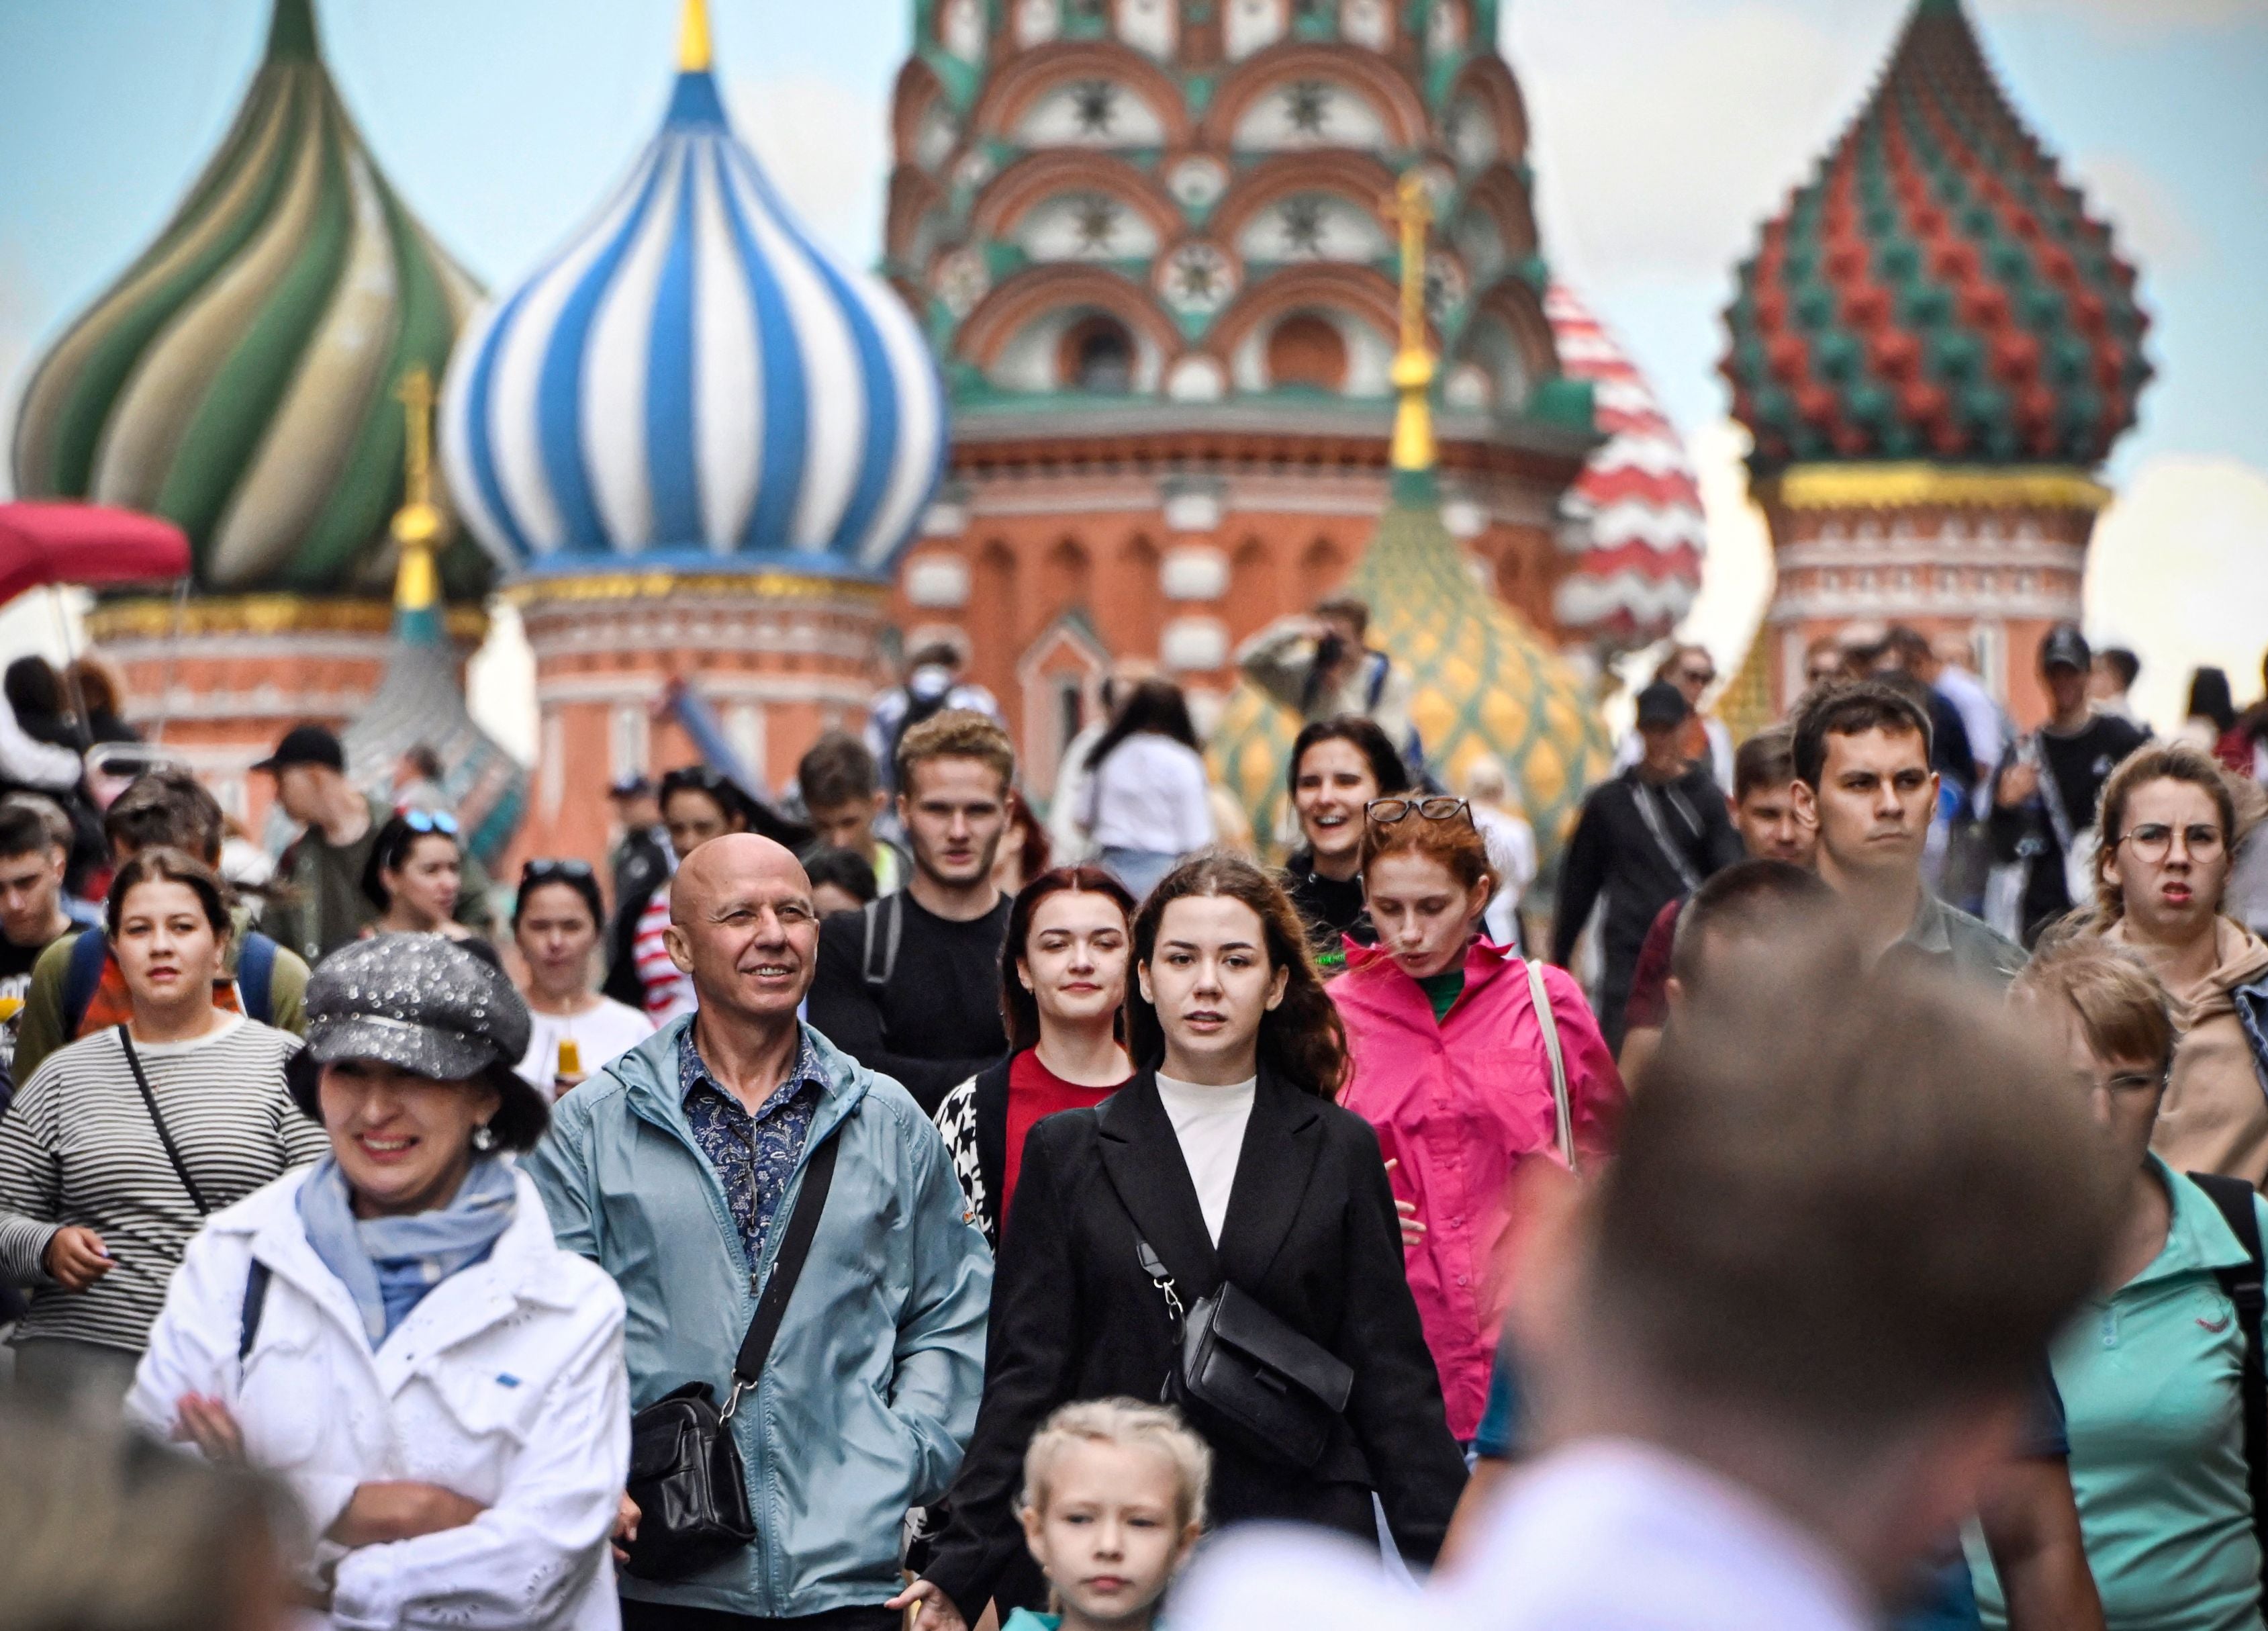 Moscow’s Red Square